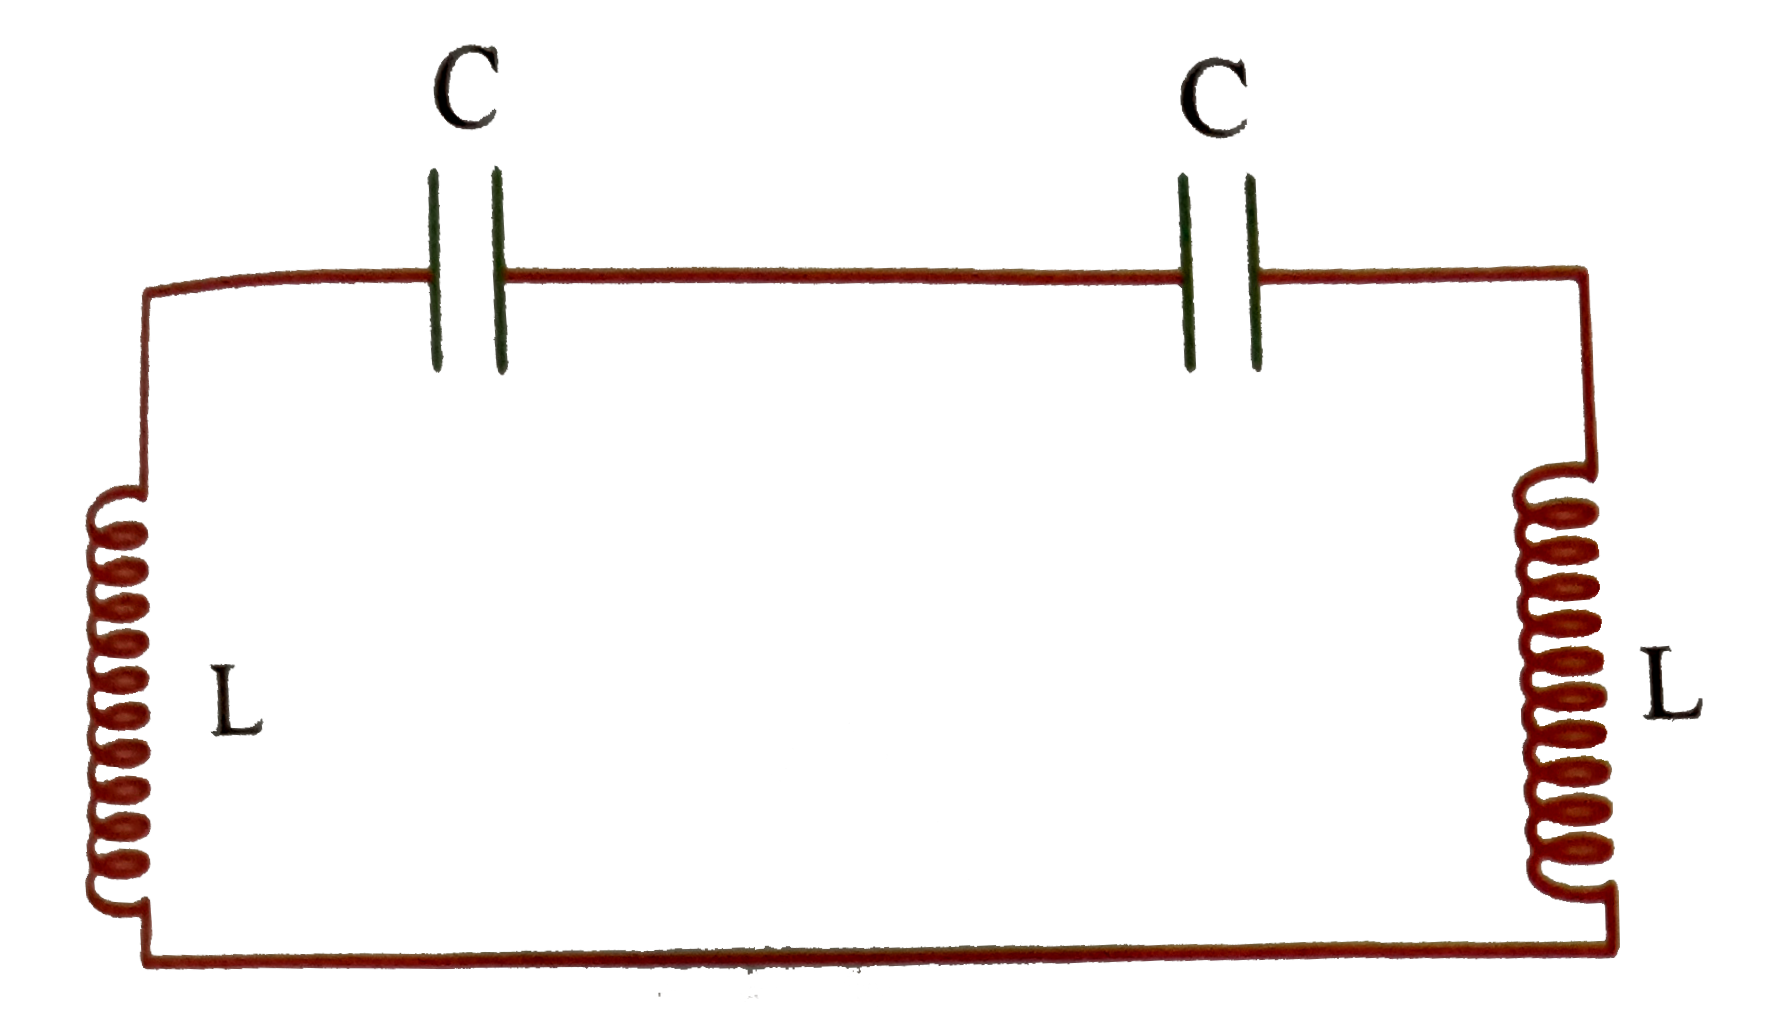 The natural frequency of the circuit shown in the figure is